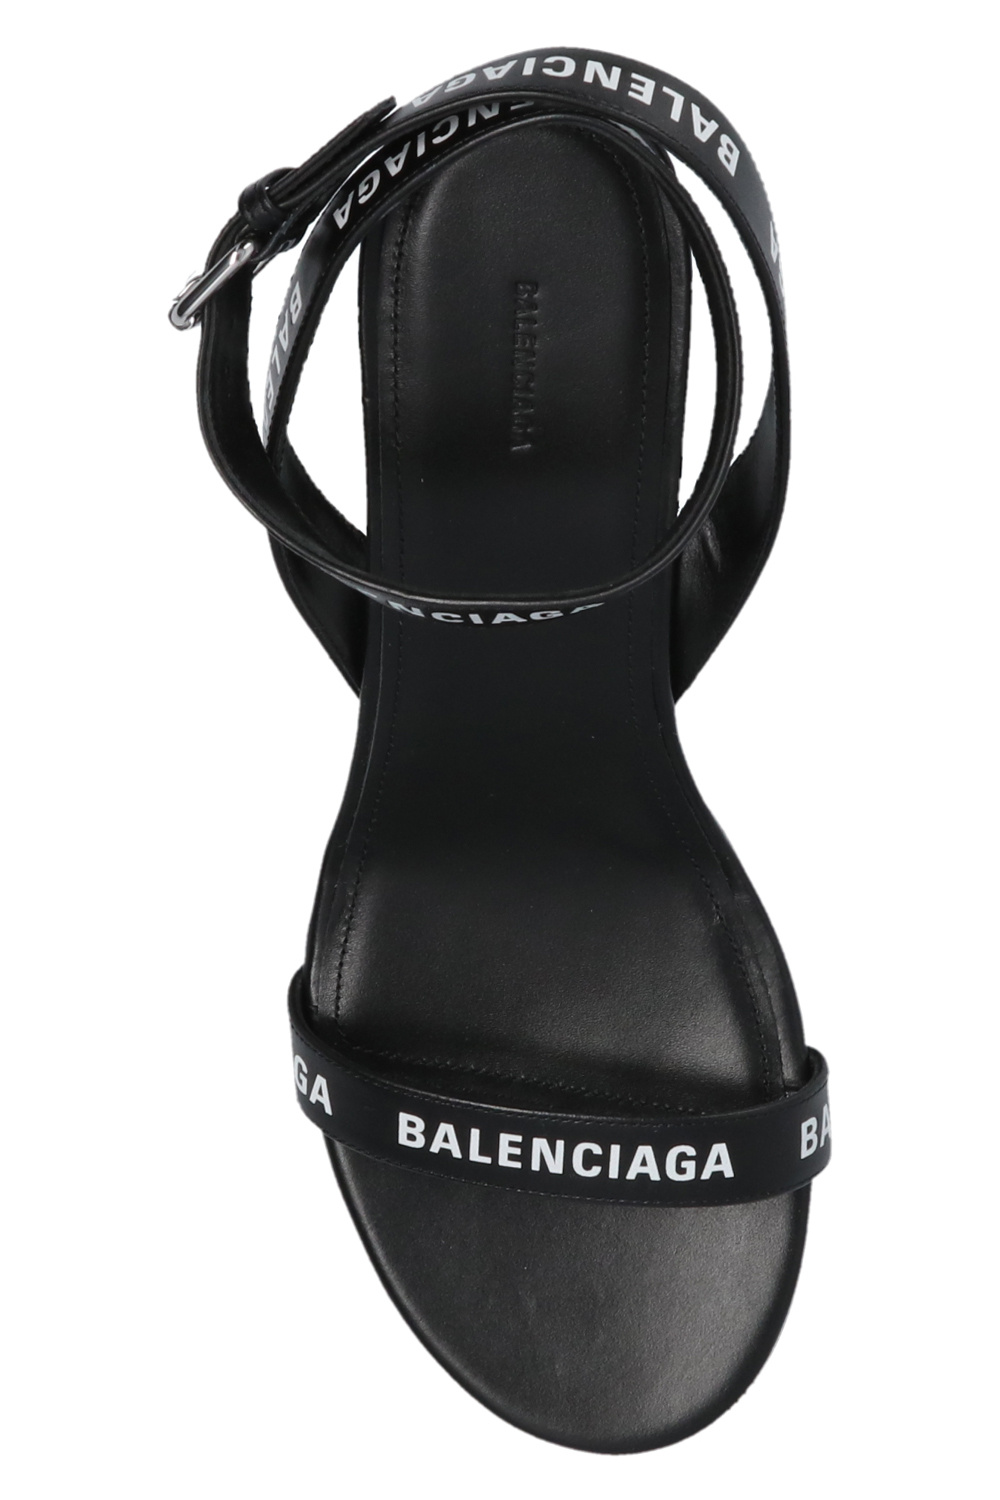 Balenciaga These shoes will be last long for outdoor use